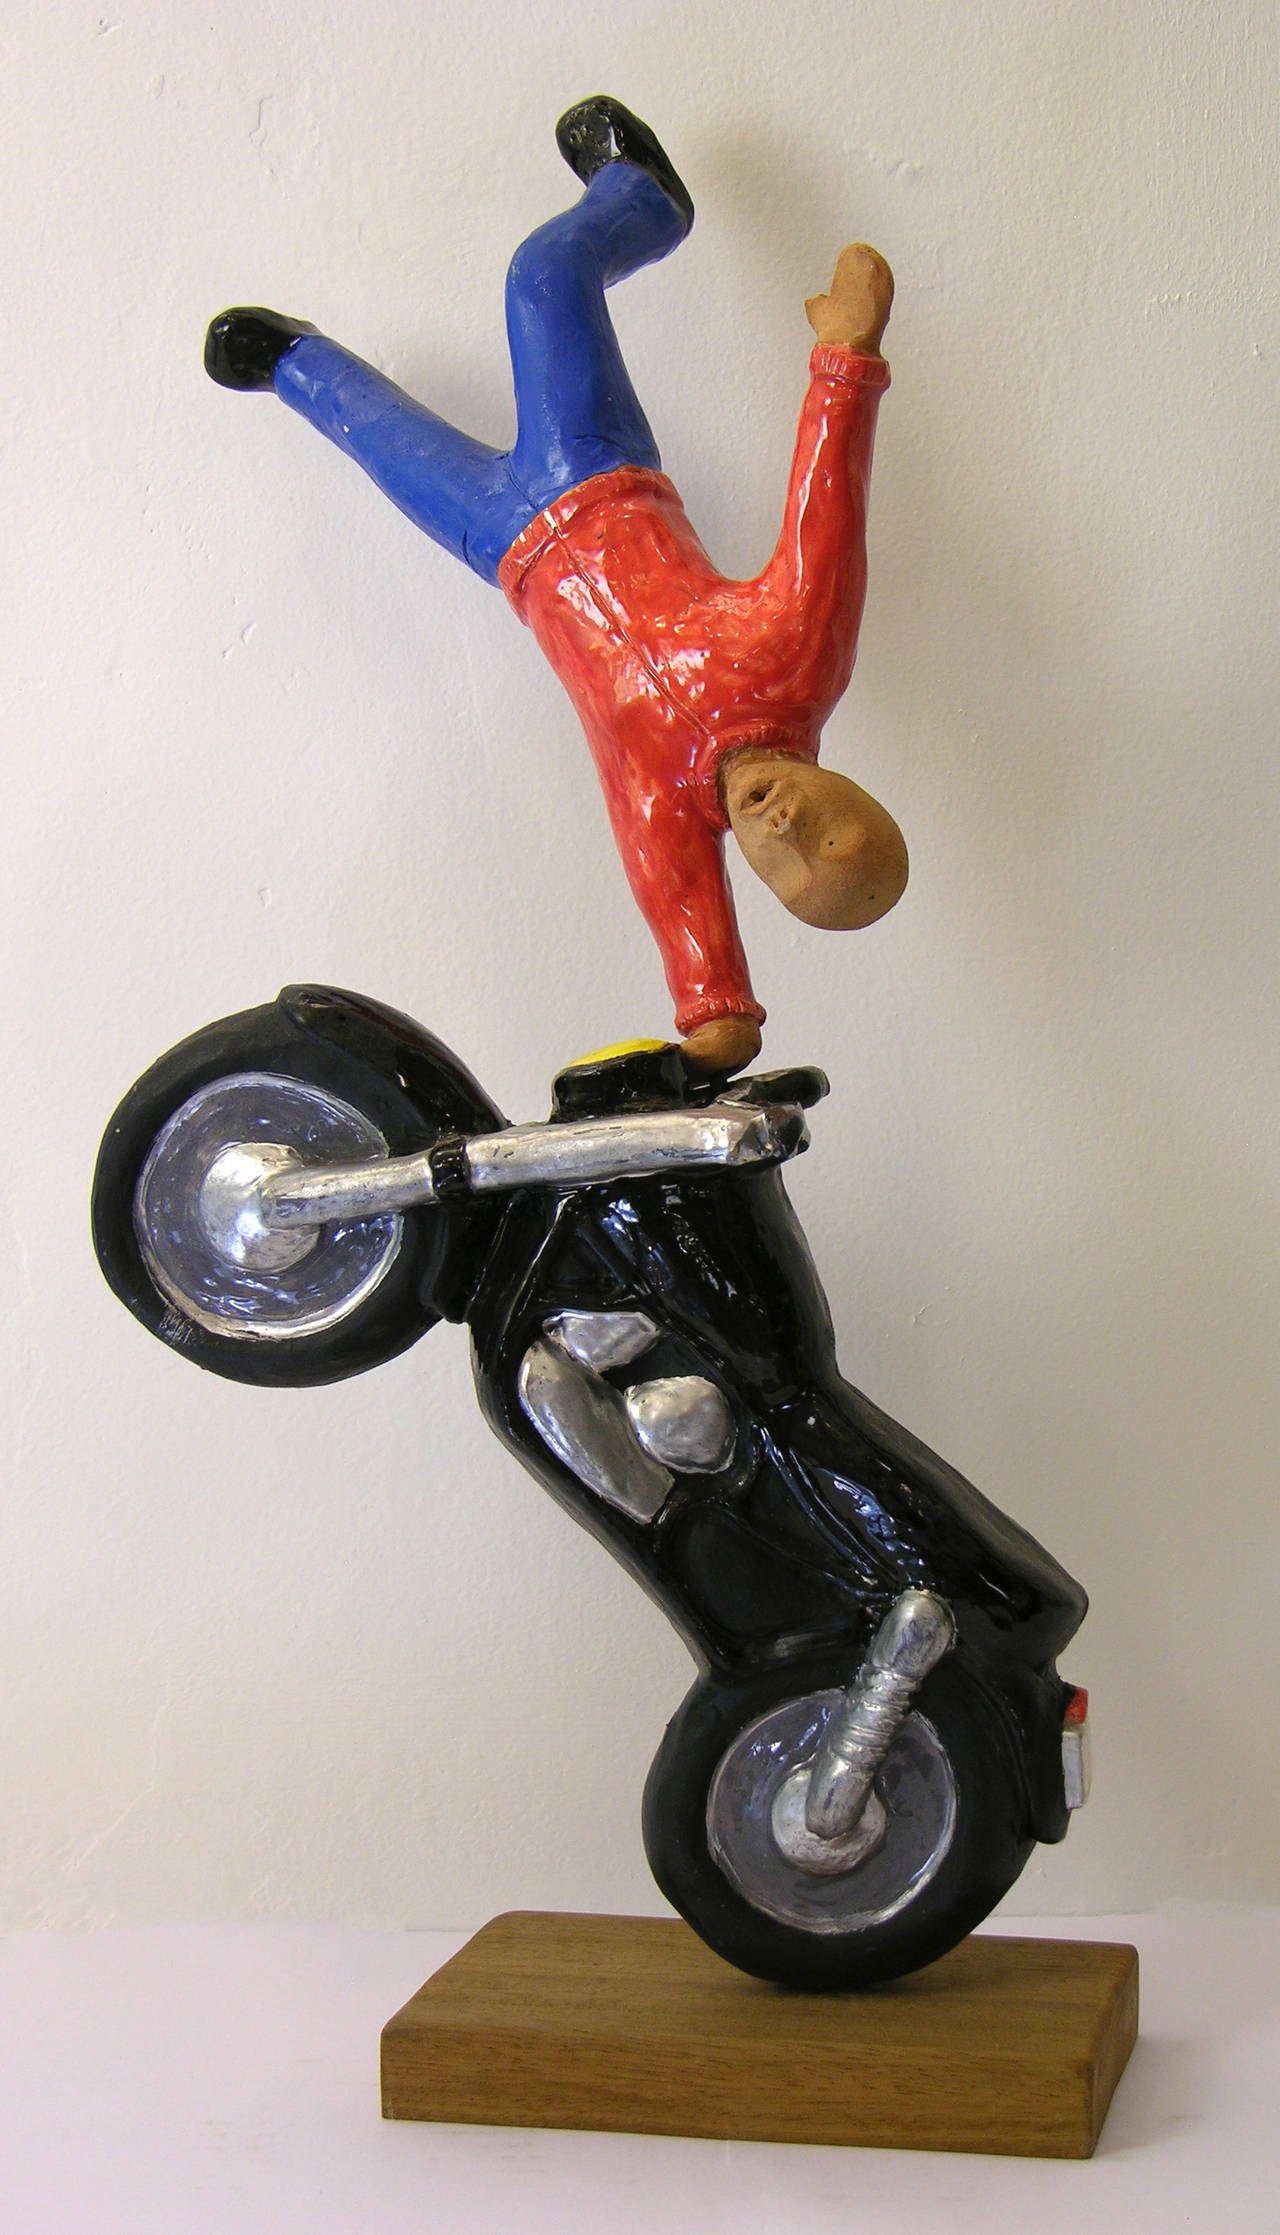 Contemporary Figure on Motorcycle, Terra Cotta Sculpture by the Italian Artist Ginestroni